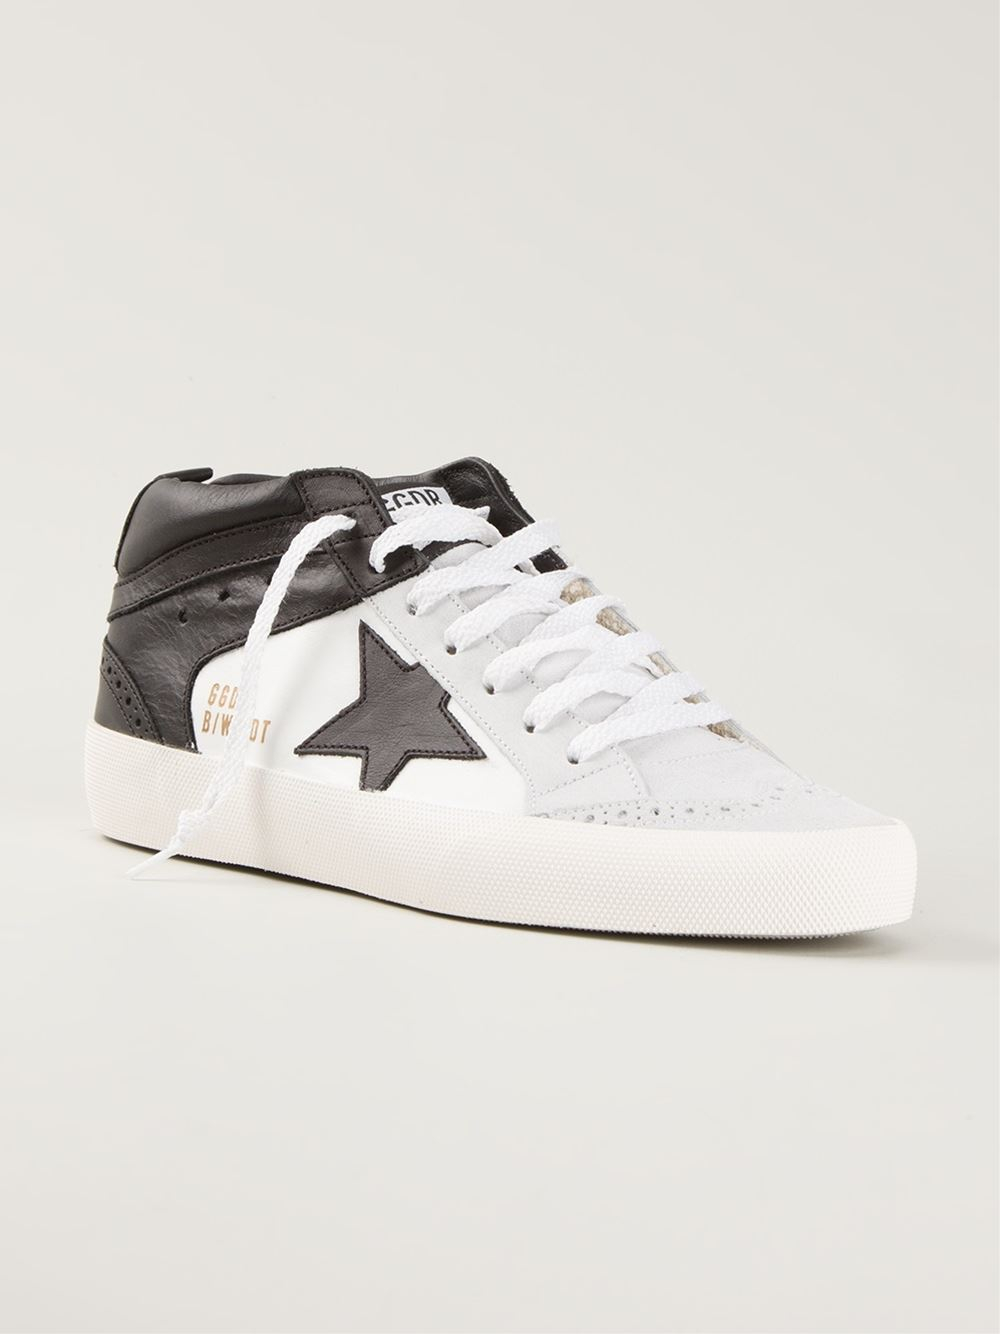 Goose Limited Sneakers in White - Lyst